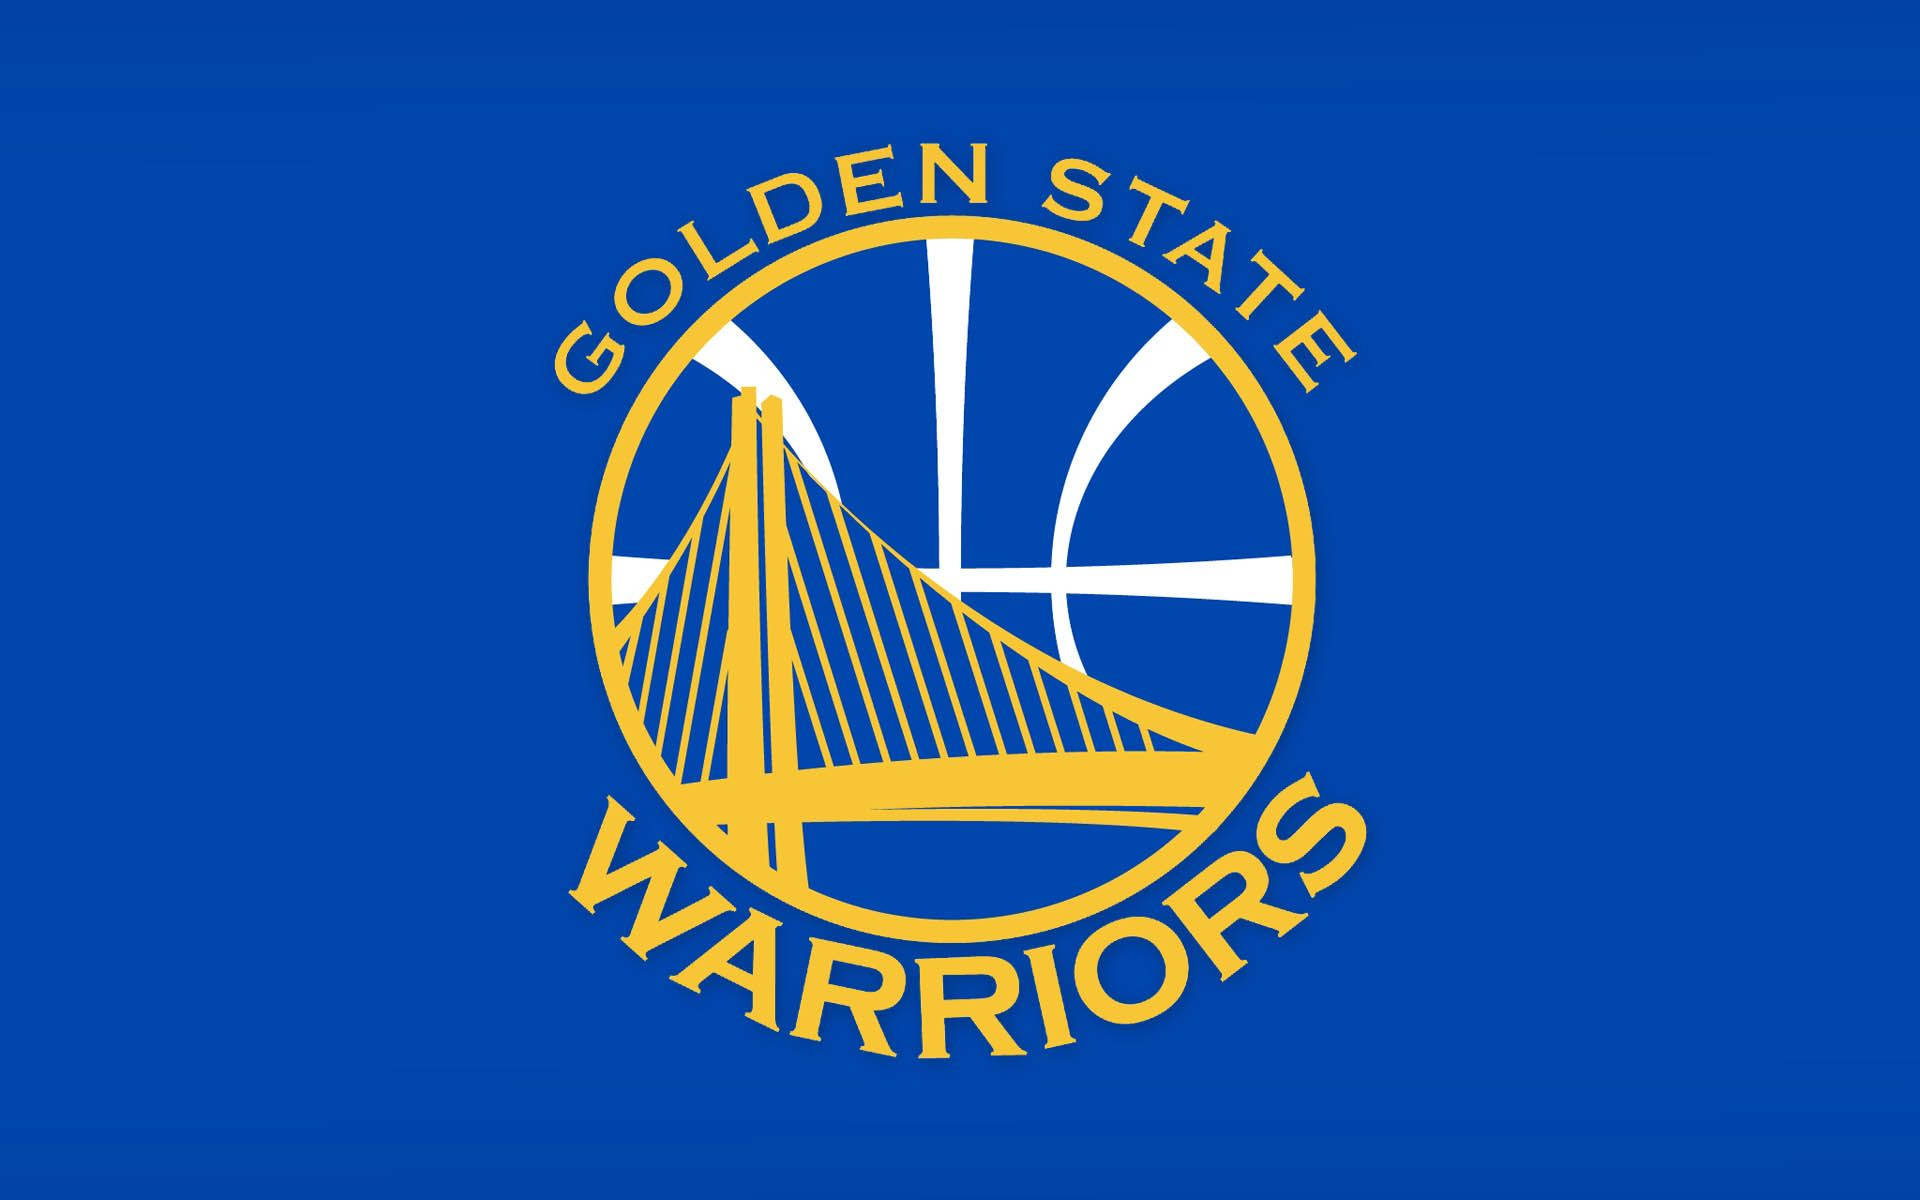 Golden State Warriors Undecorated Poster Background